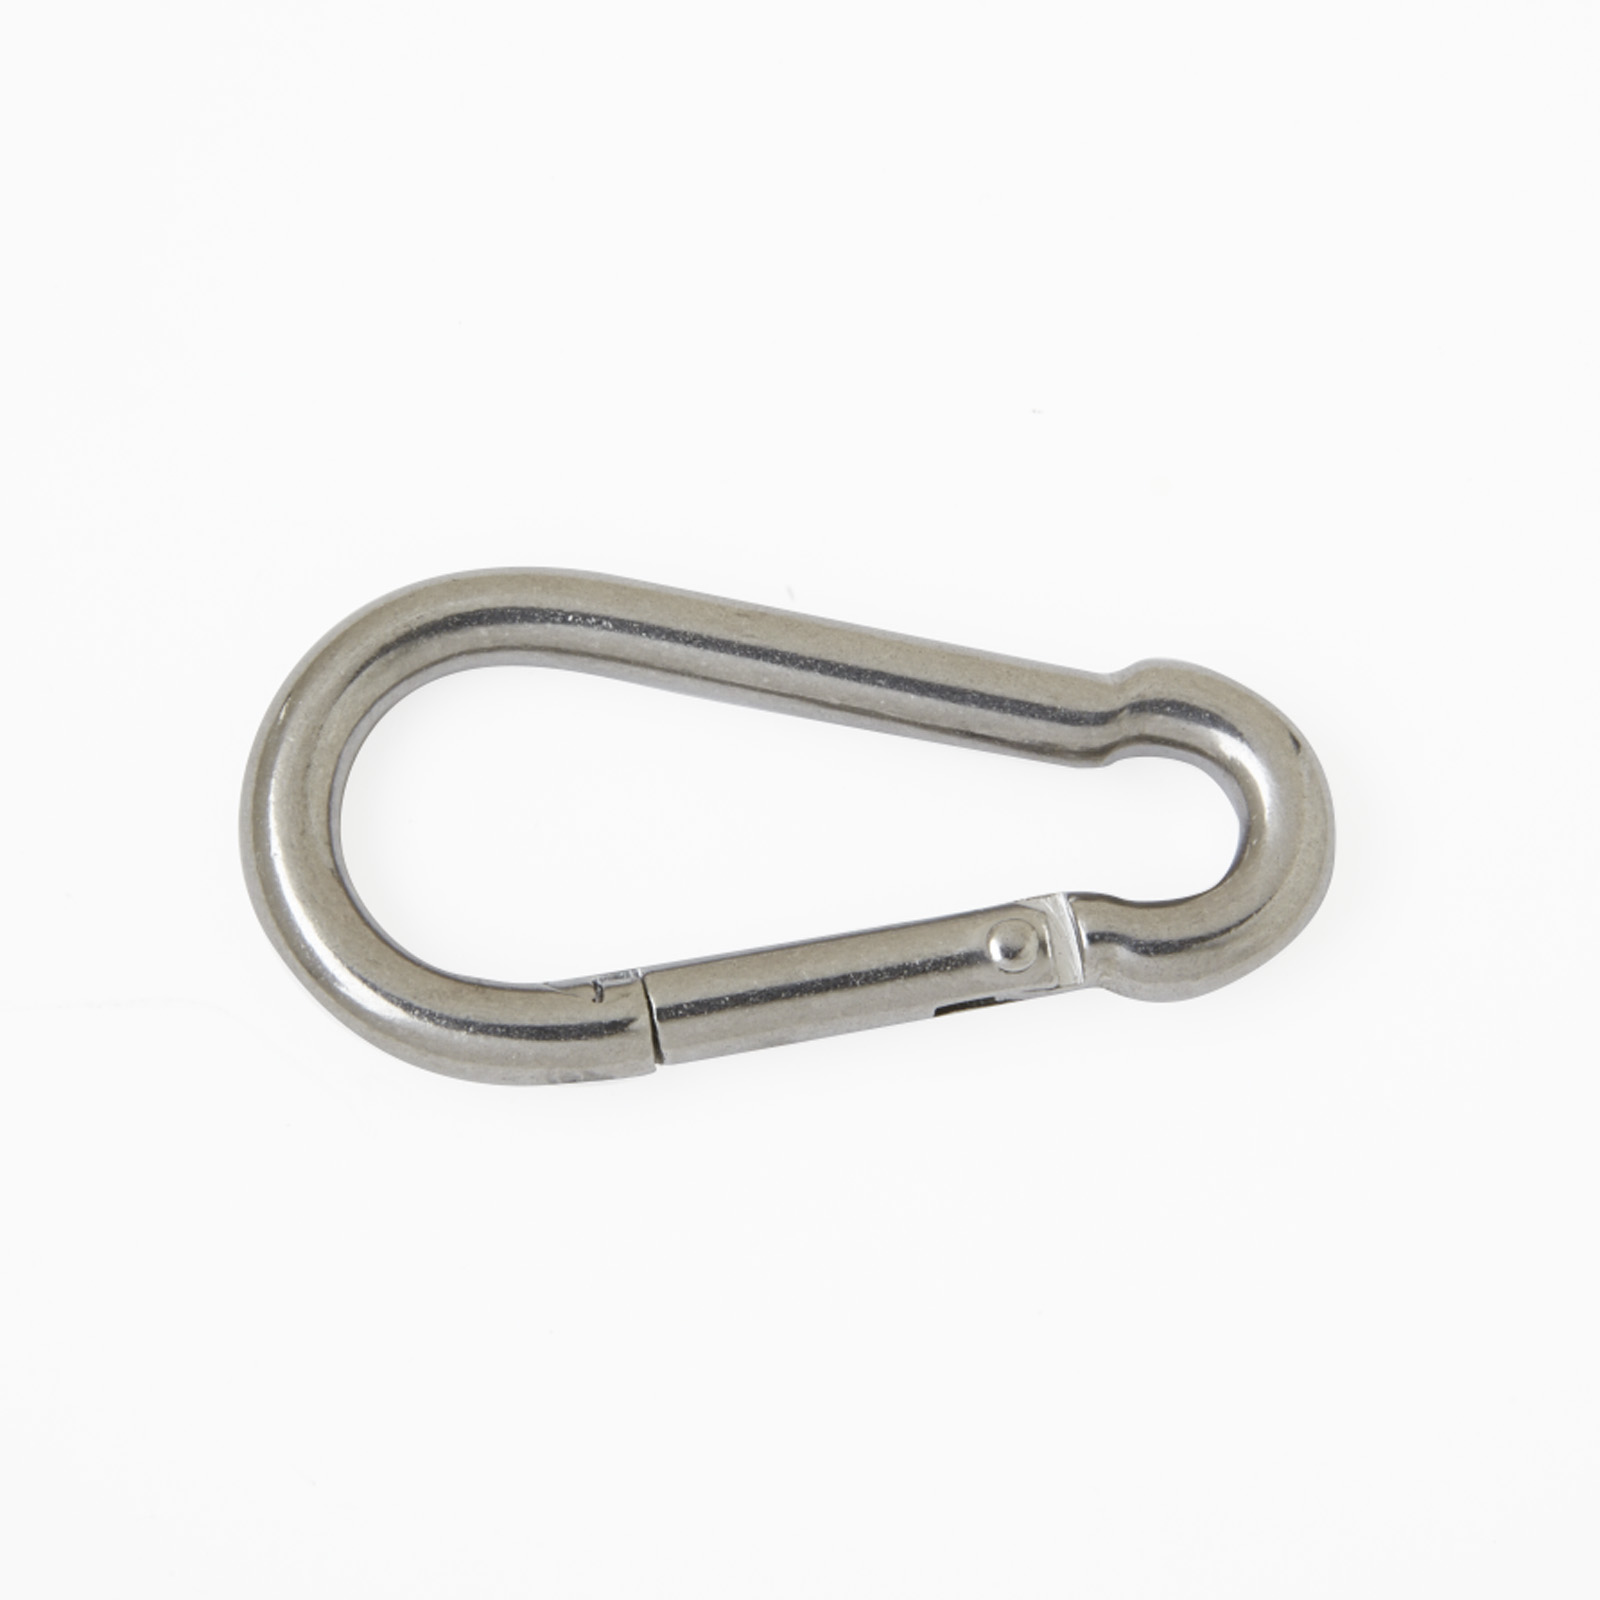 6mm STAINLESS STEEL 316 SNAP HOOK SAFETY CLIP CARABINER CLIMBING LOCK ABC 